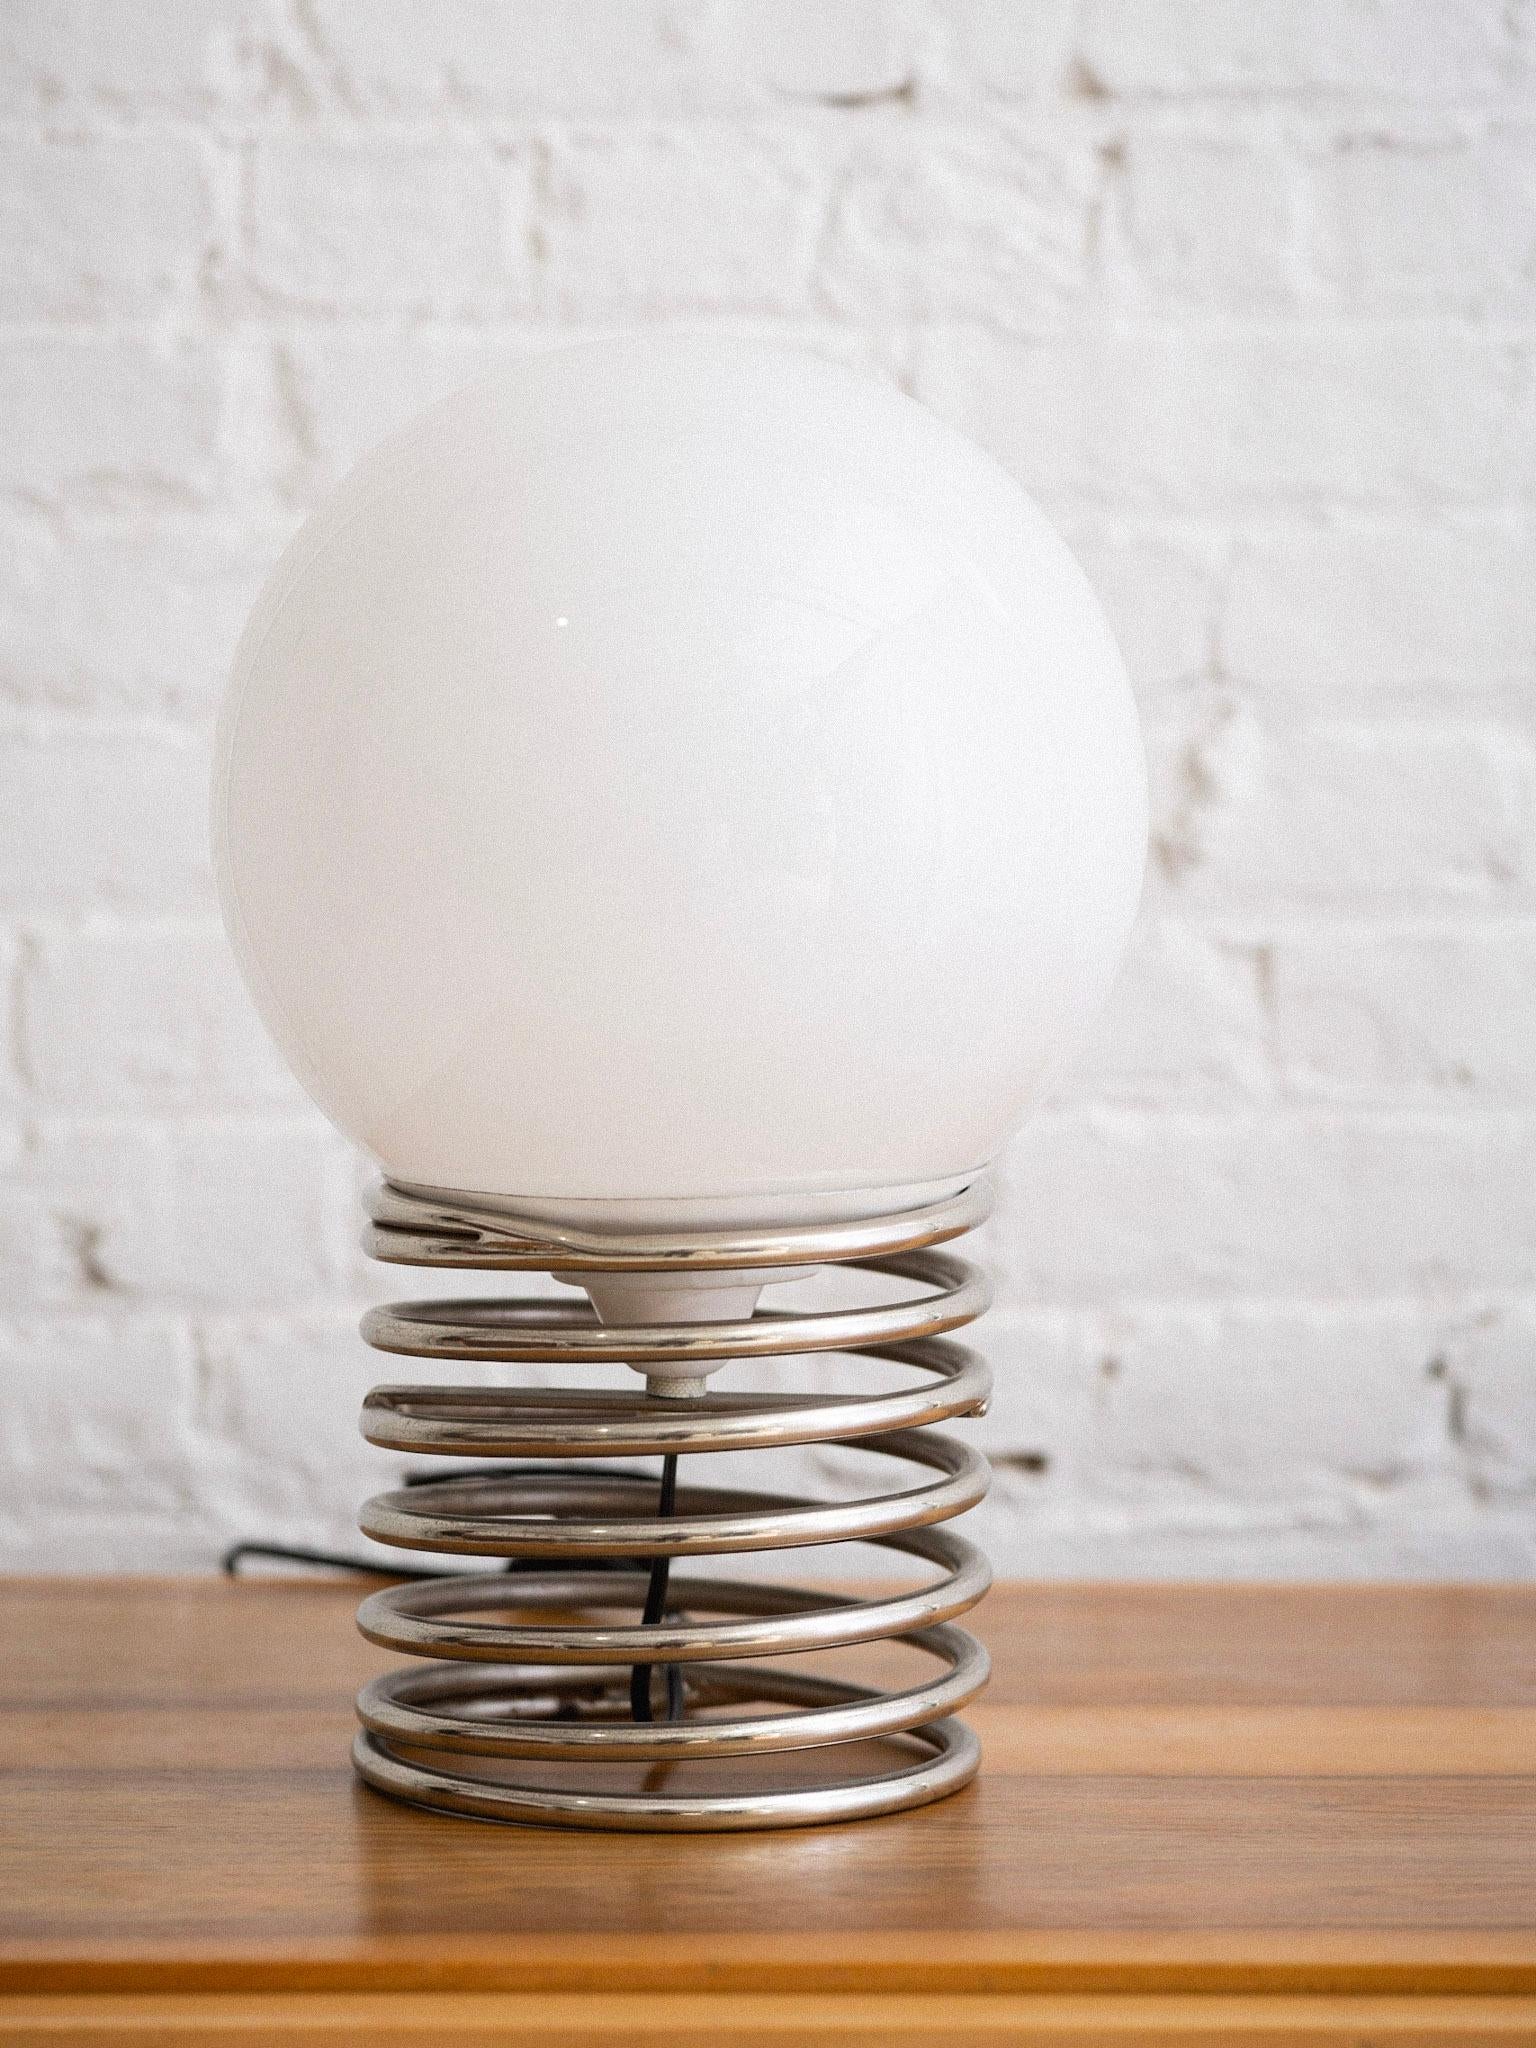 A midcentury Italian chrome and glass table lamp. Glass globes sits securely atop the chrome spring base. Sourced in Northern Italy. Two available, sold separately.